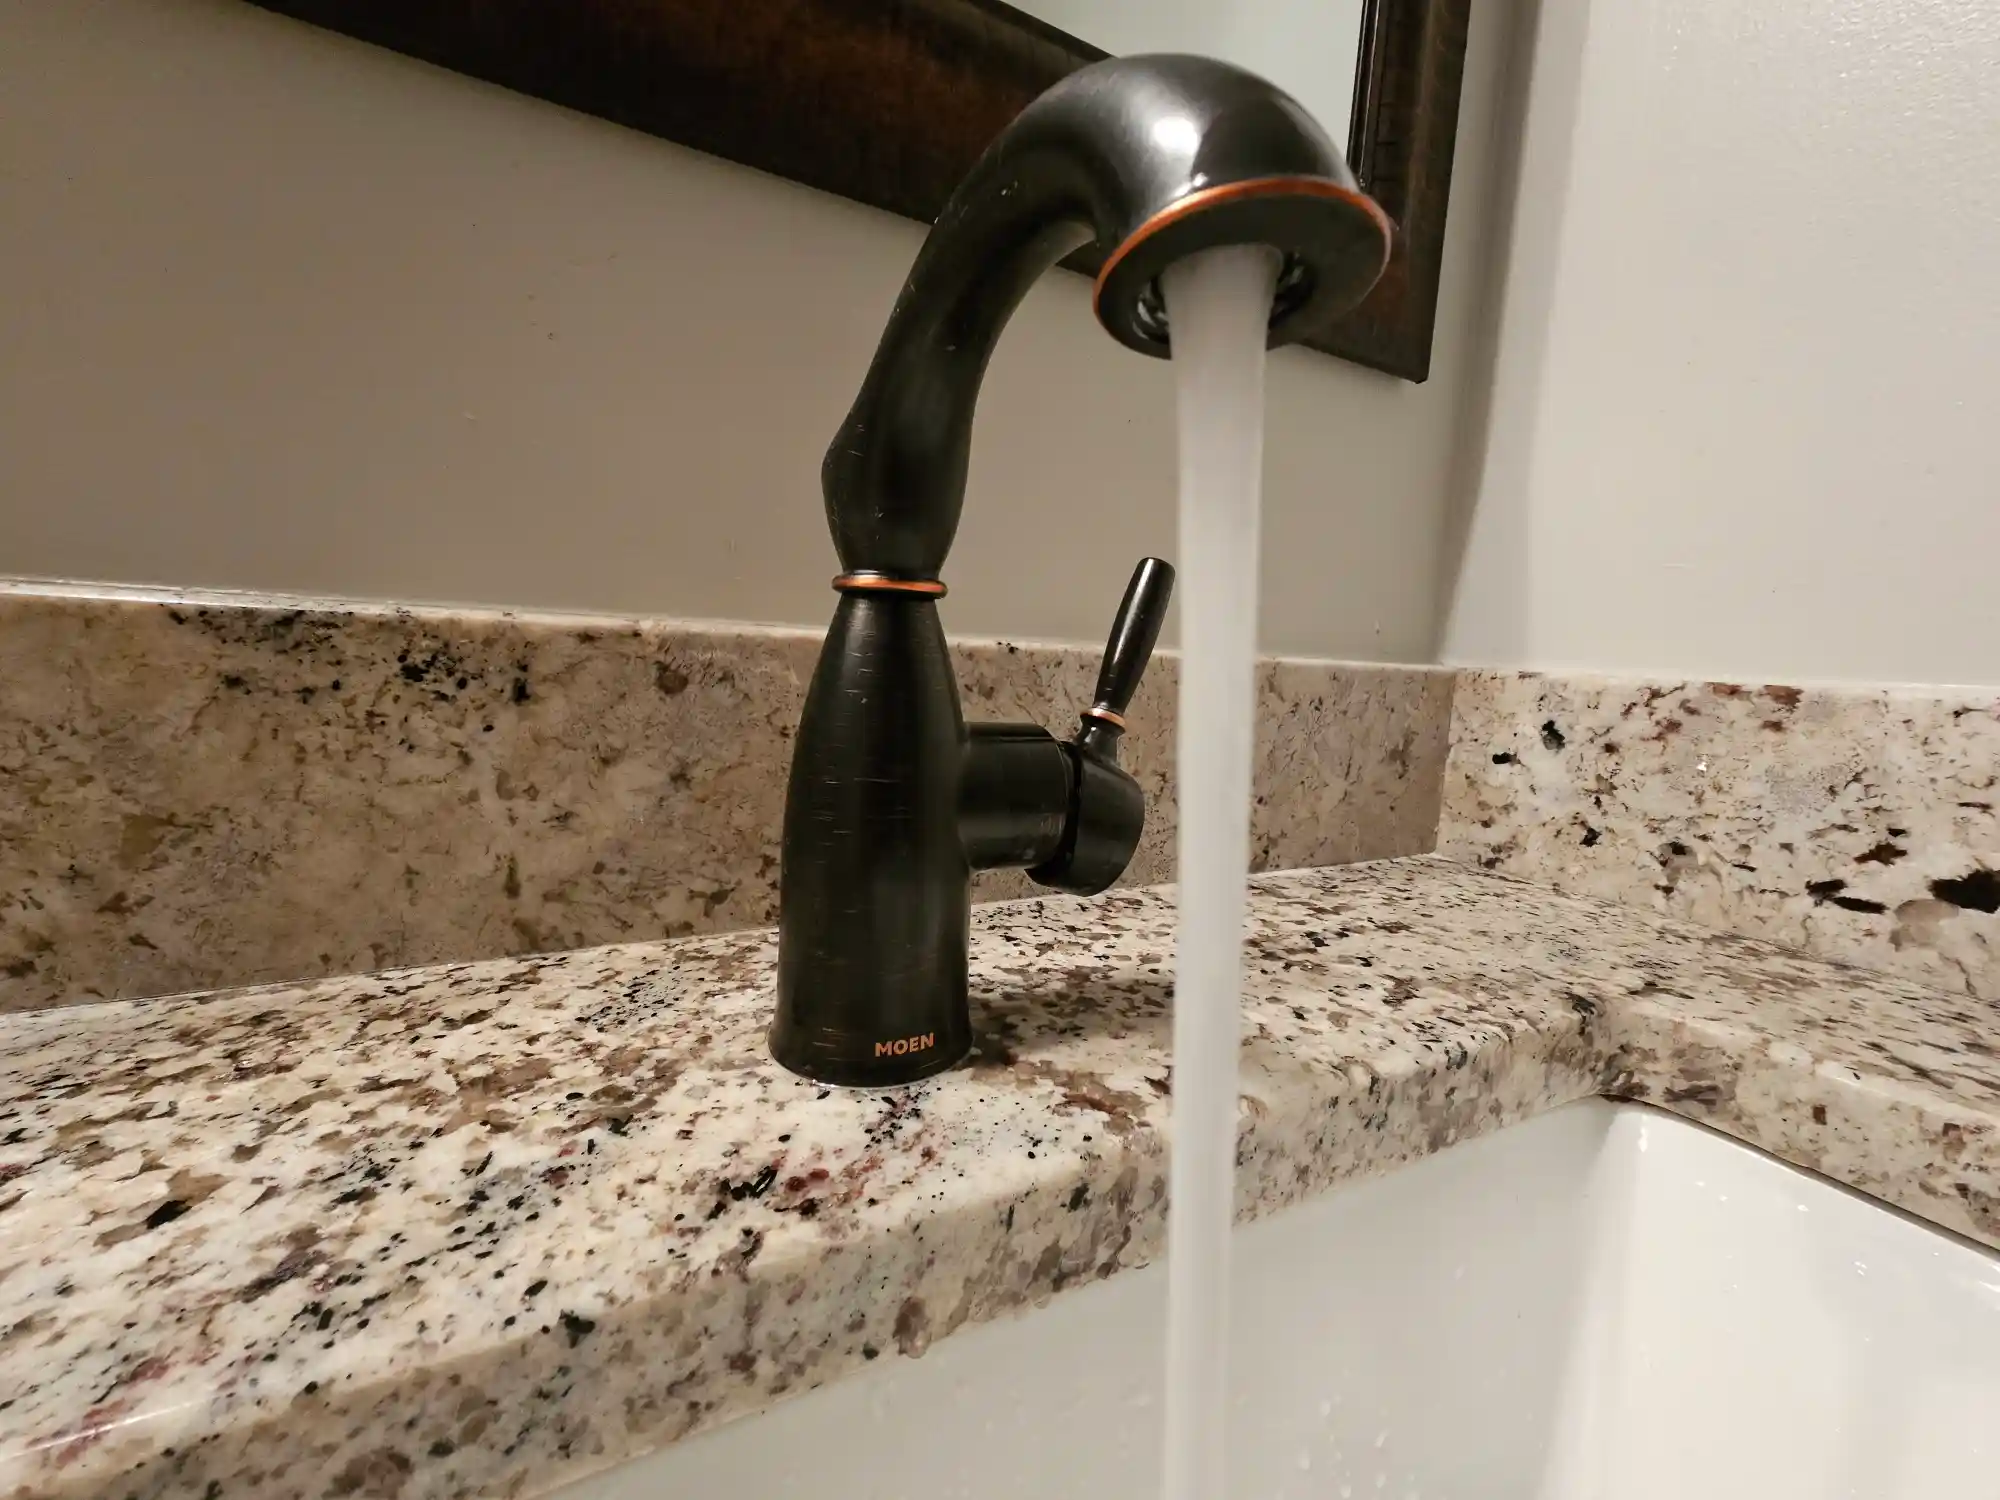 Bathroom faucet with running water.